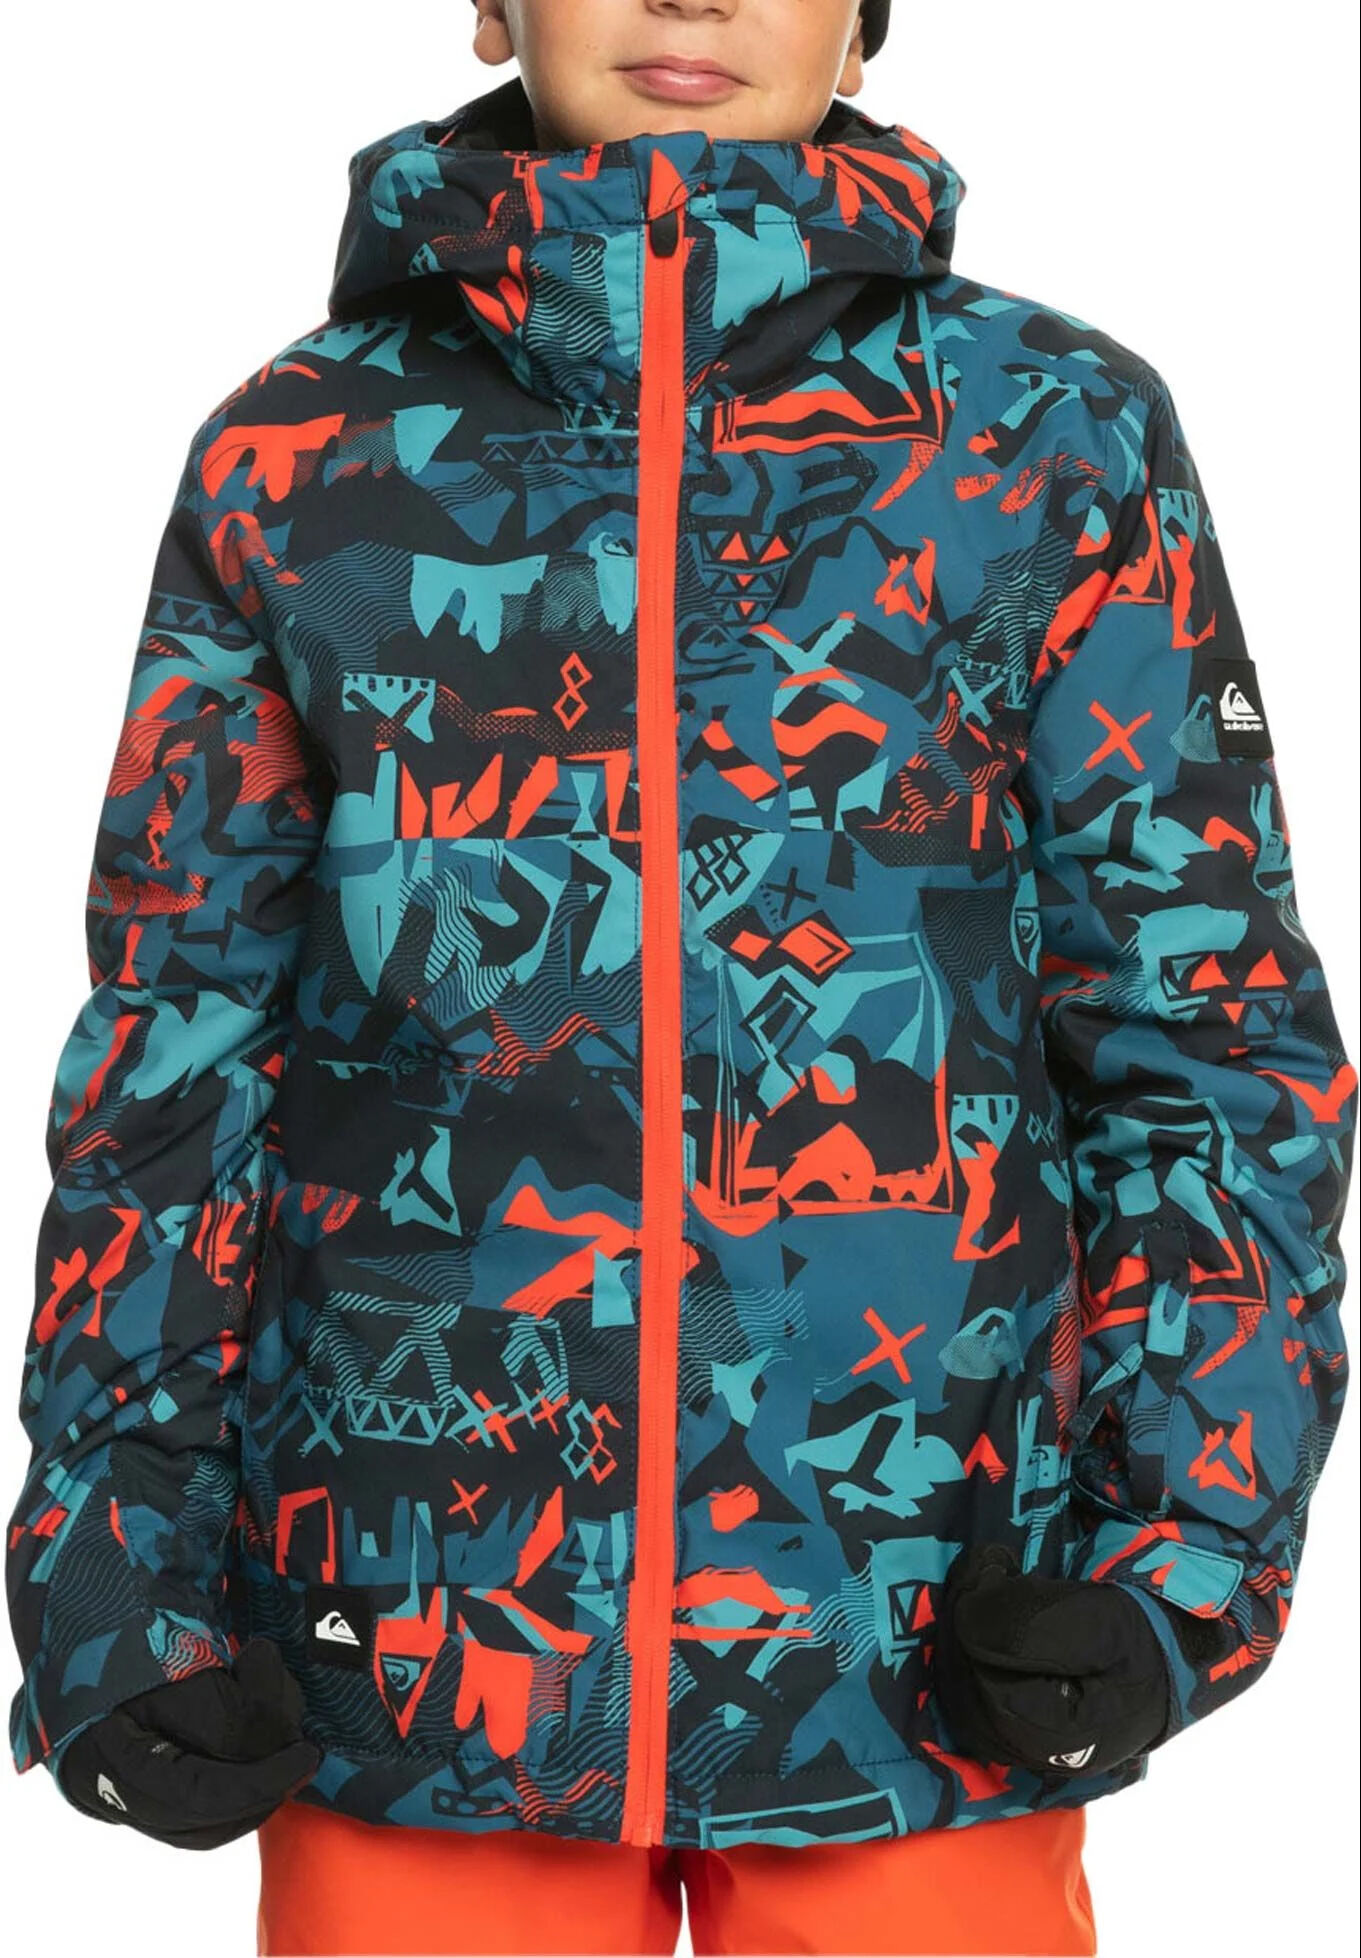 Quiksilver MISSION PRINTED YOUTH BUILDING MOUNTAINS GRENADINE 3XS